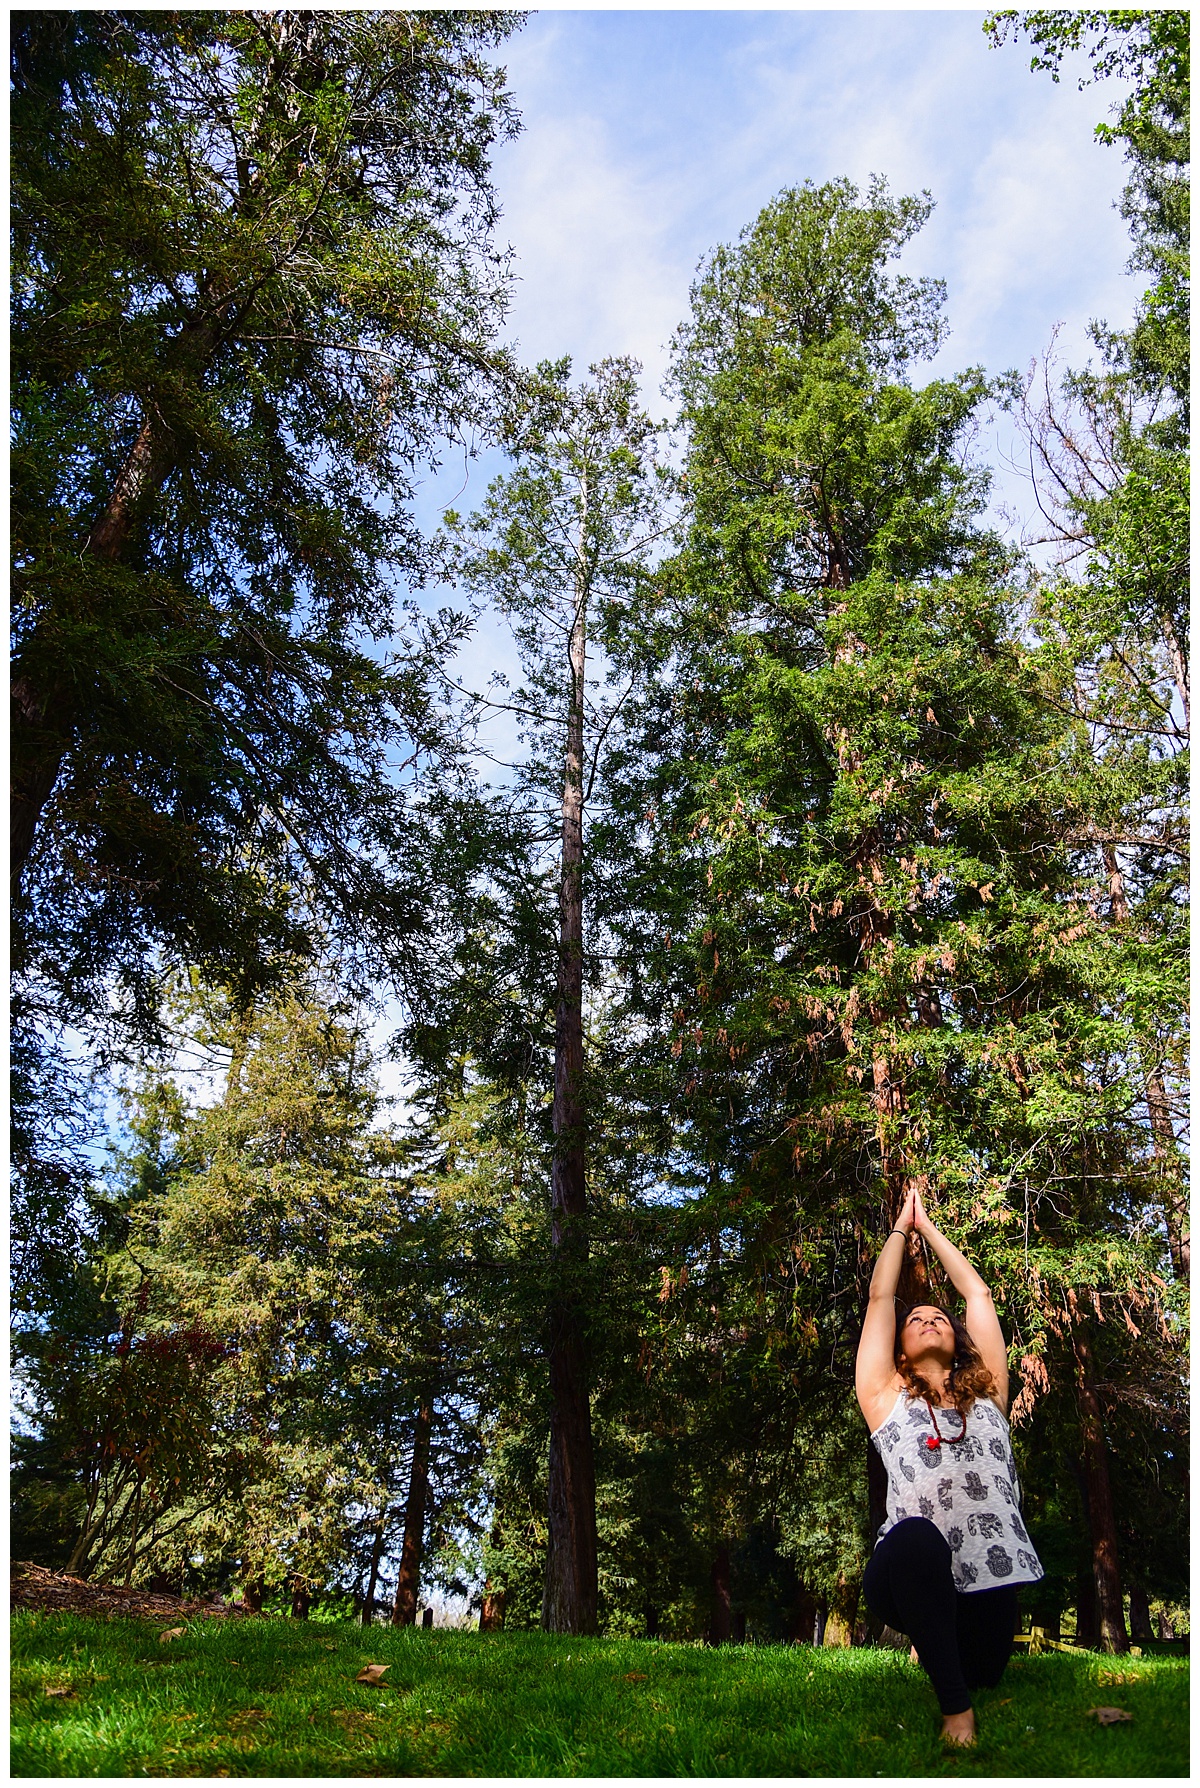 Woman doing yoga in Cuesta Park, Mountain View, CA with redwood trees